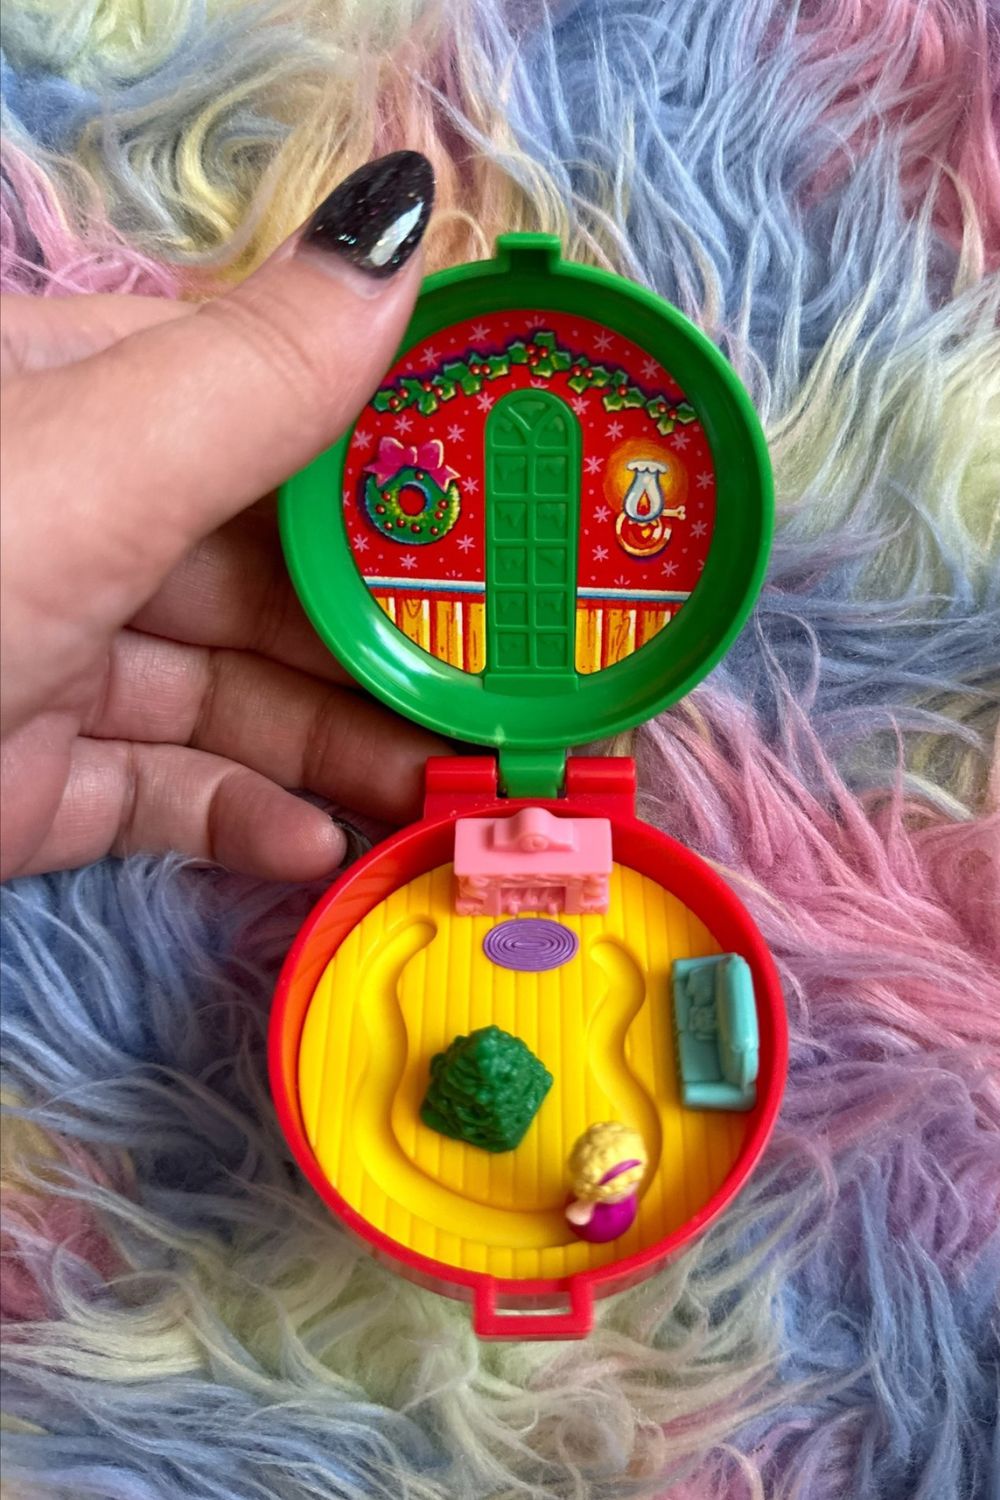 1993 MCDONALDS POLLY POCKET PLAYSET TOTALLY TOY HOLIDAY COMPACT CHRISTMAS WREATH*